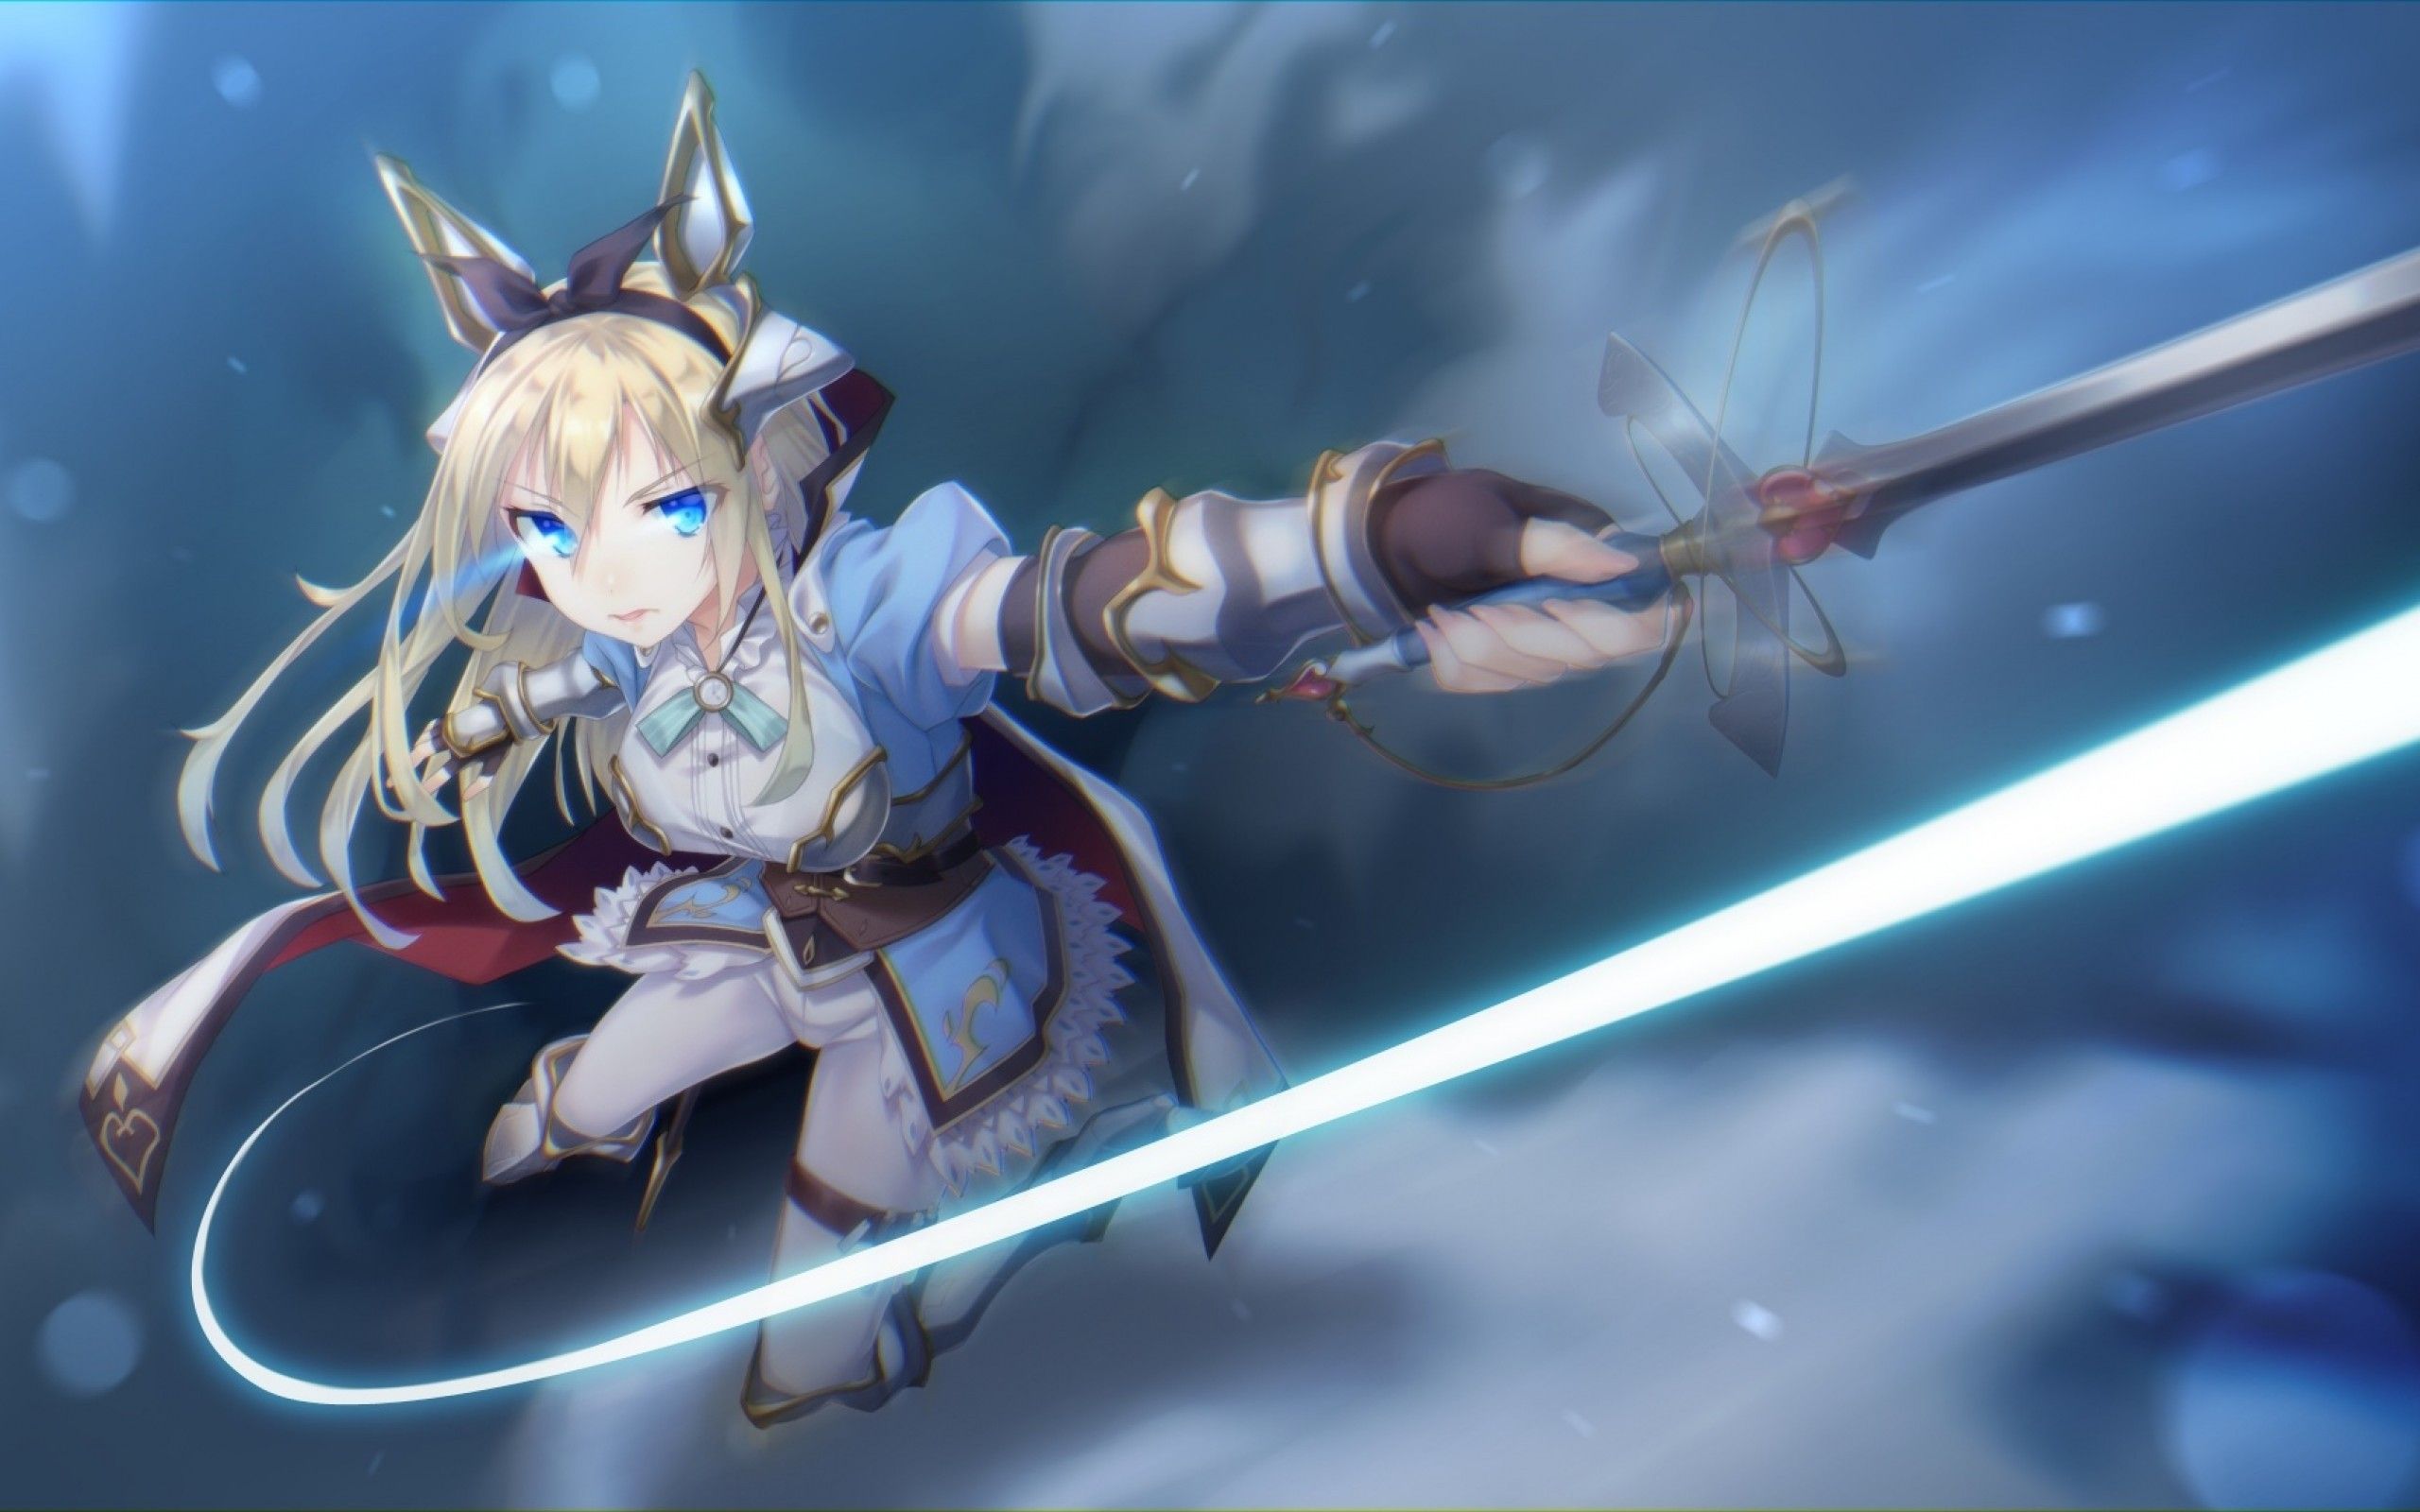 Download 2560x1600 Anime Girl, Blonde, Sword, Ribbon, Blue Eyes, Fighting Wallpaper for MacBook Pro 13 inch